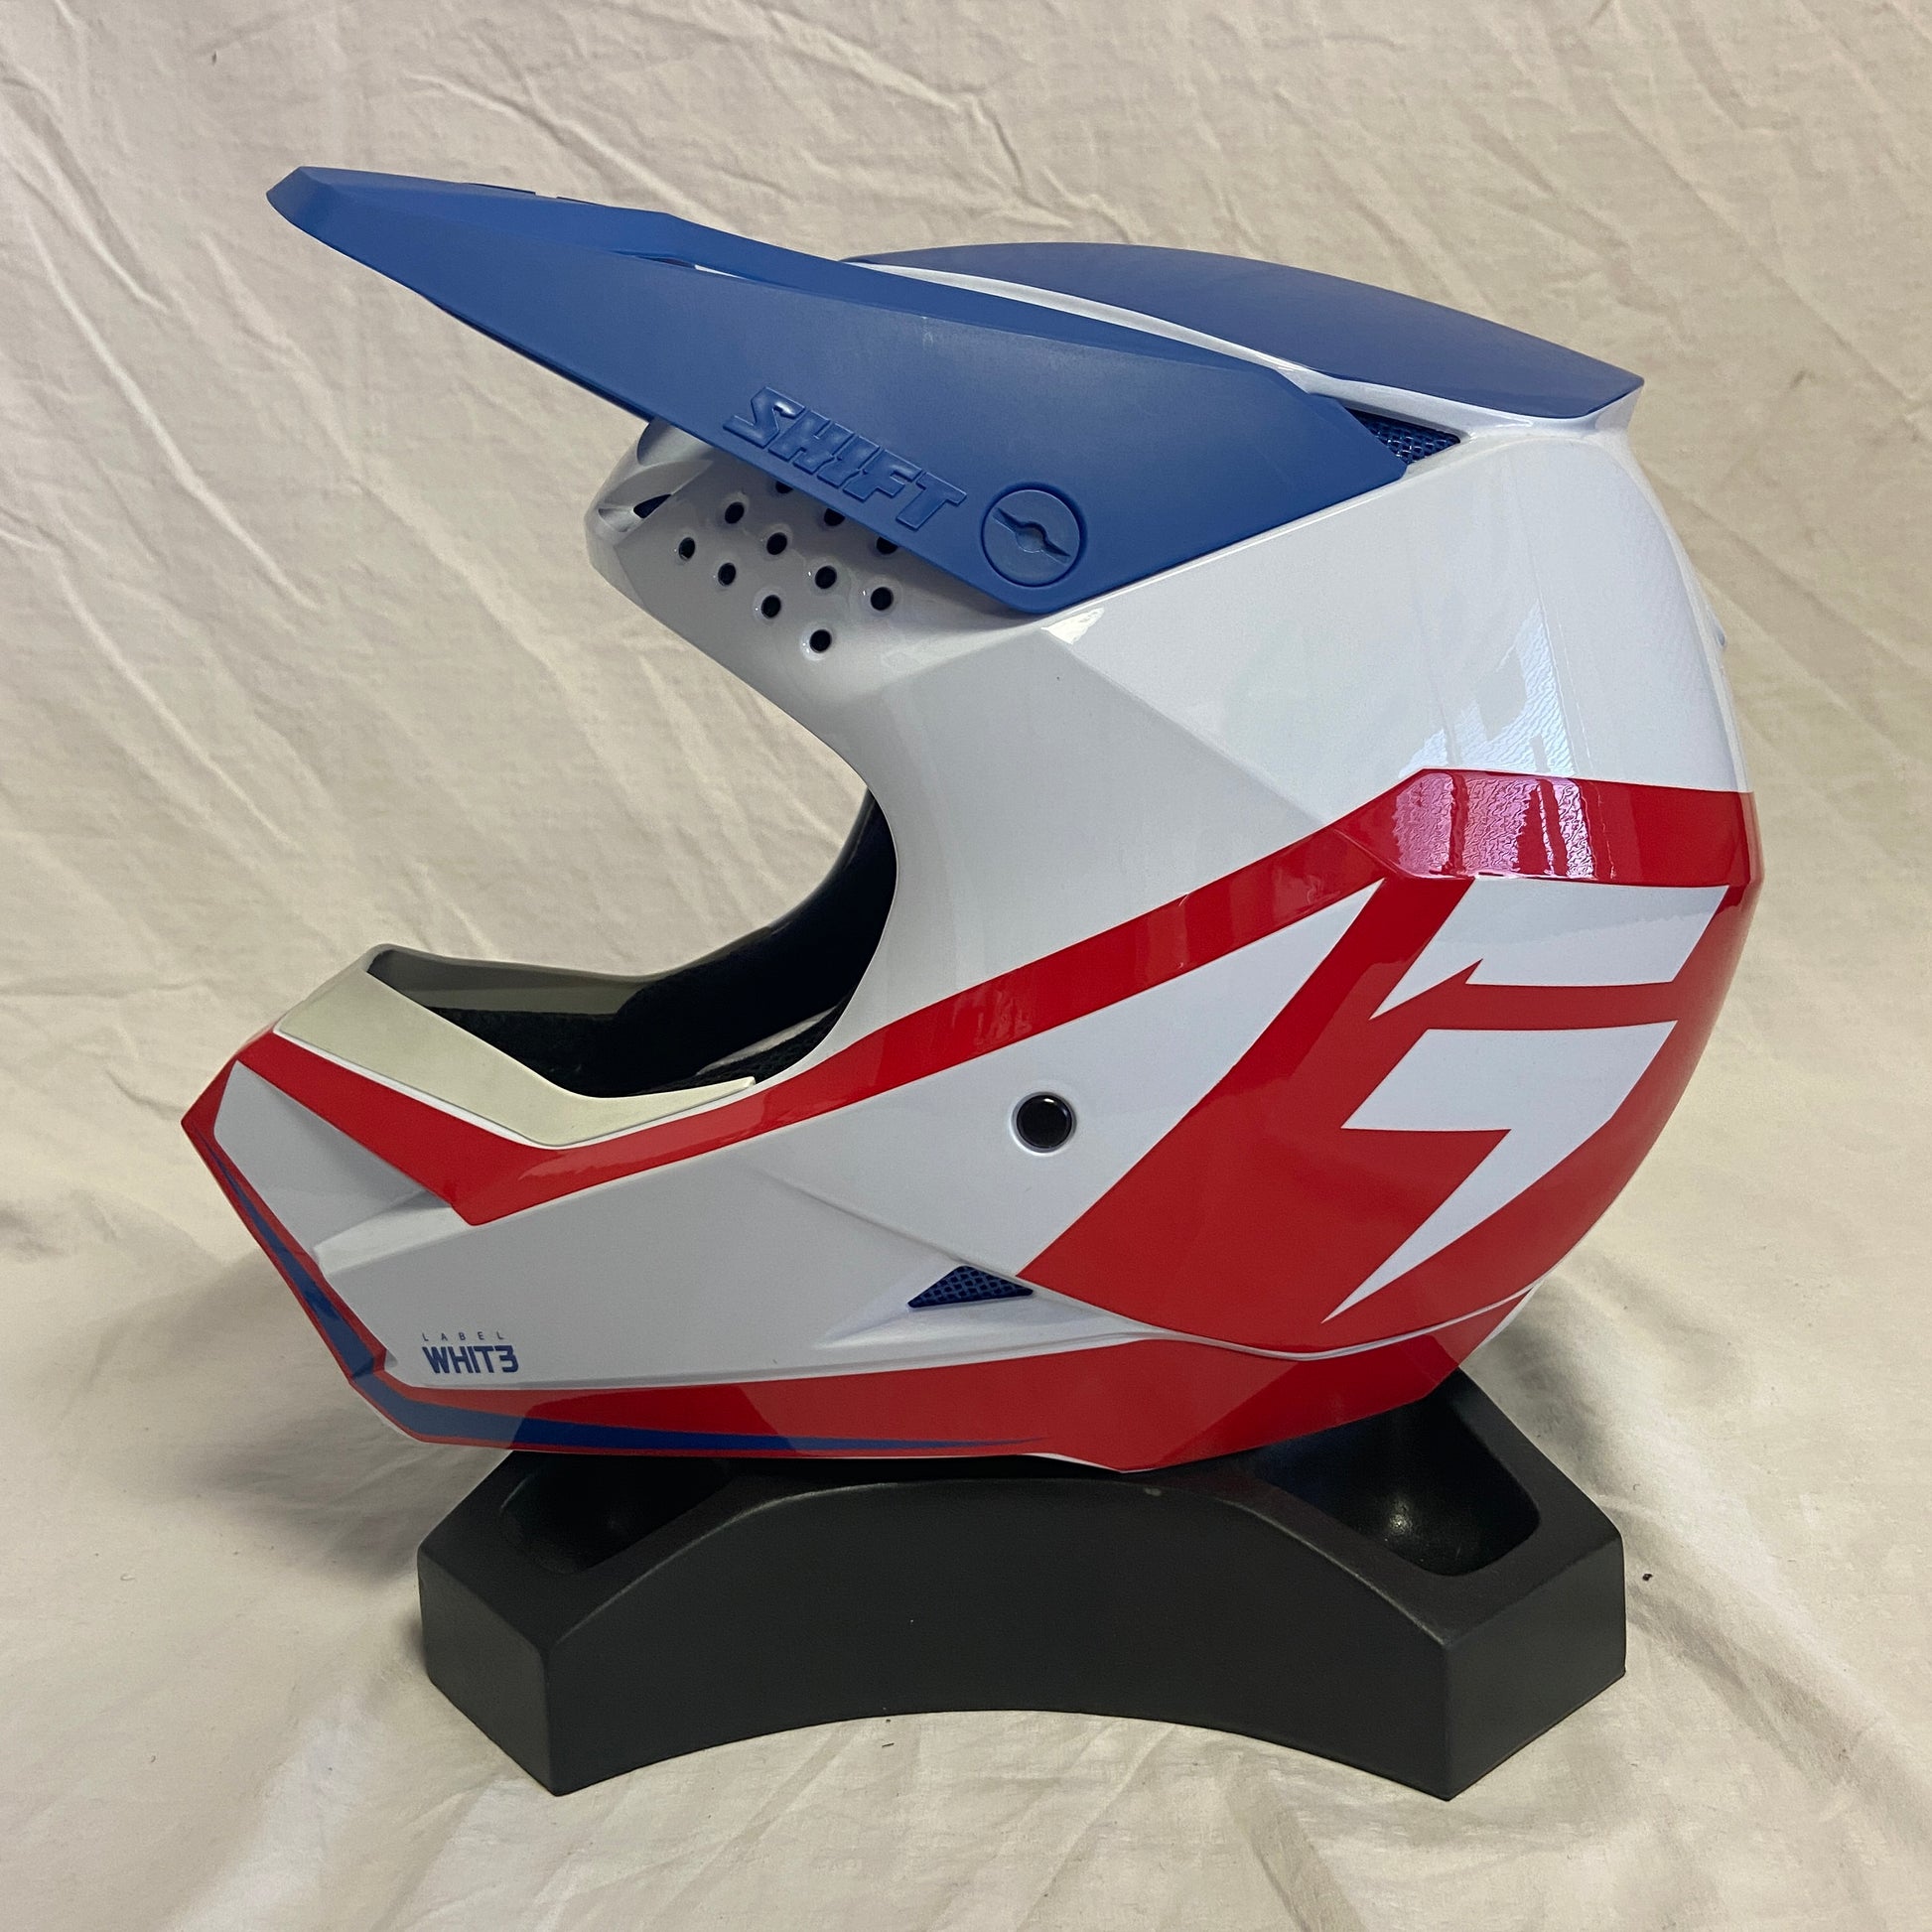 Shift Label Whit3 Helmet Bic White / Red / Blue Youth Large (Open Box) - ExtremeSupply.com